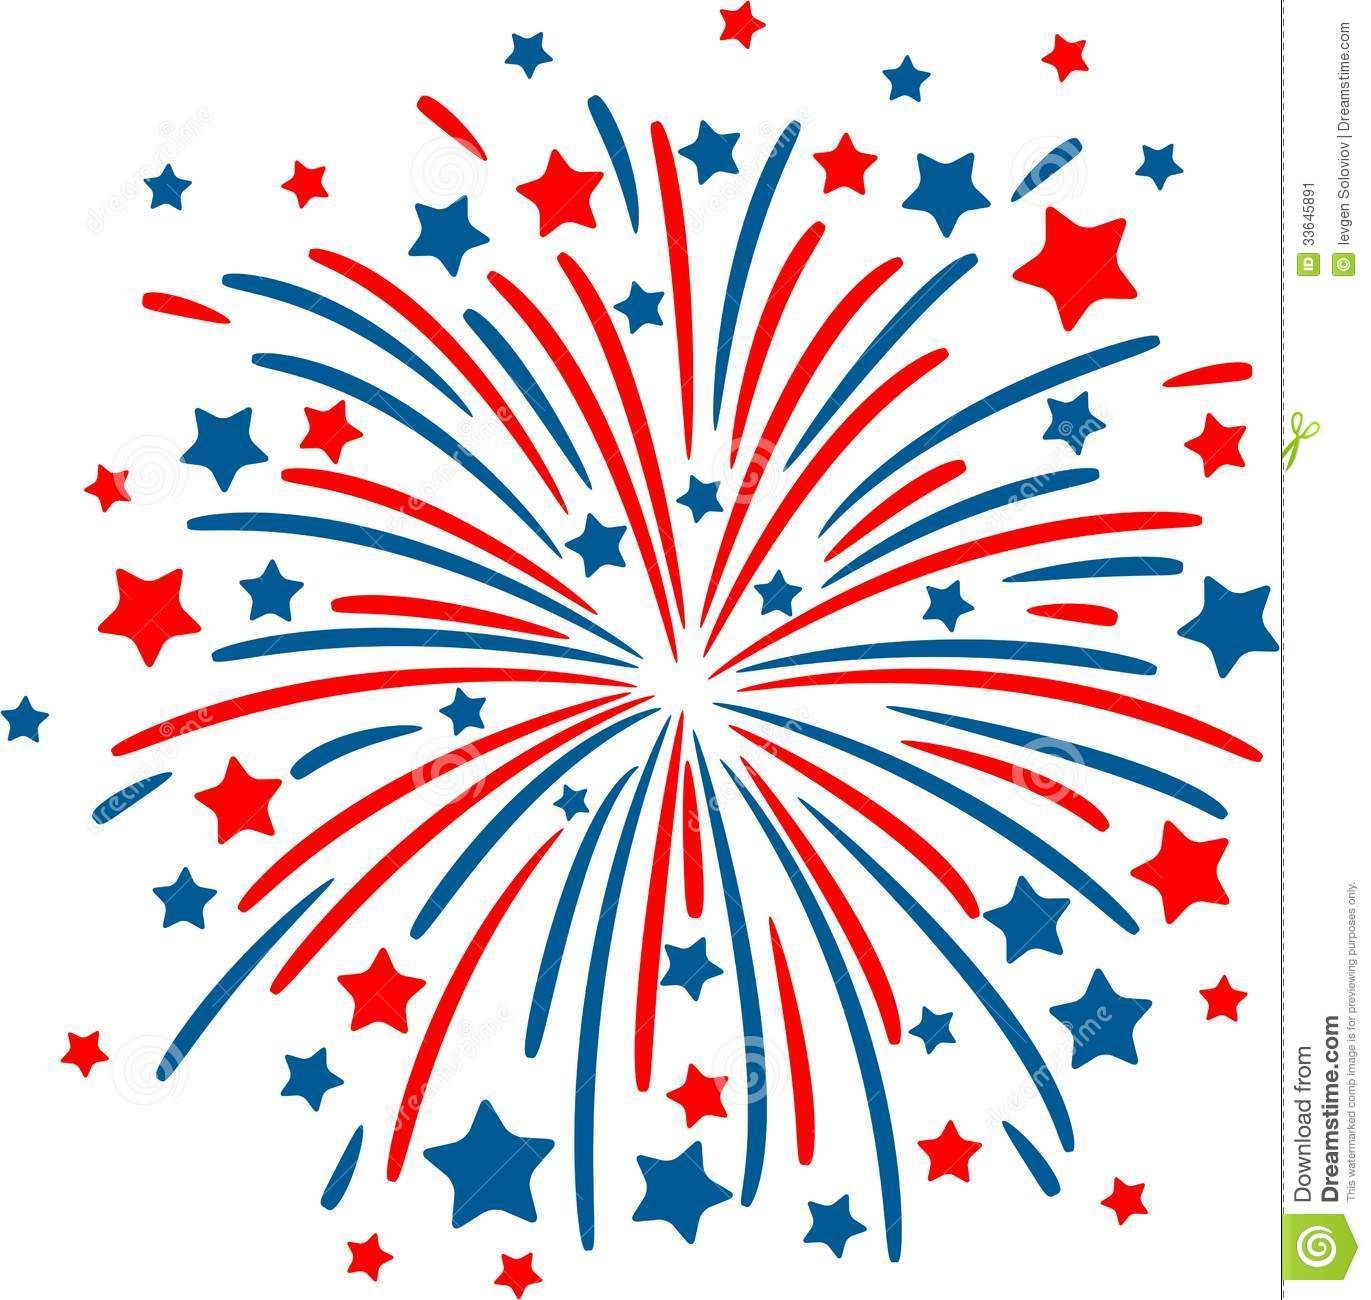 Firecracker clip art clipart images gallery for free.